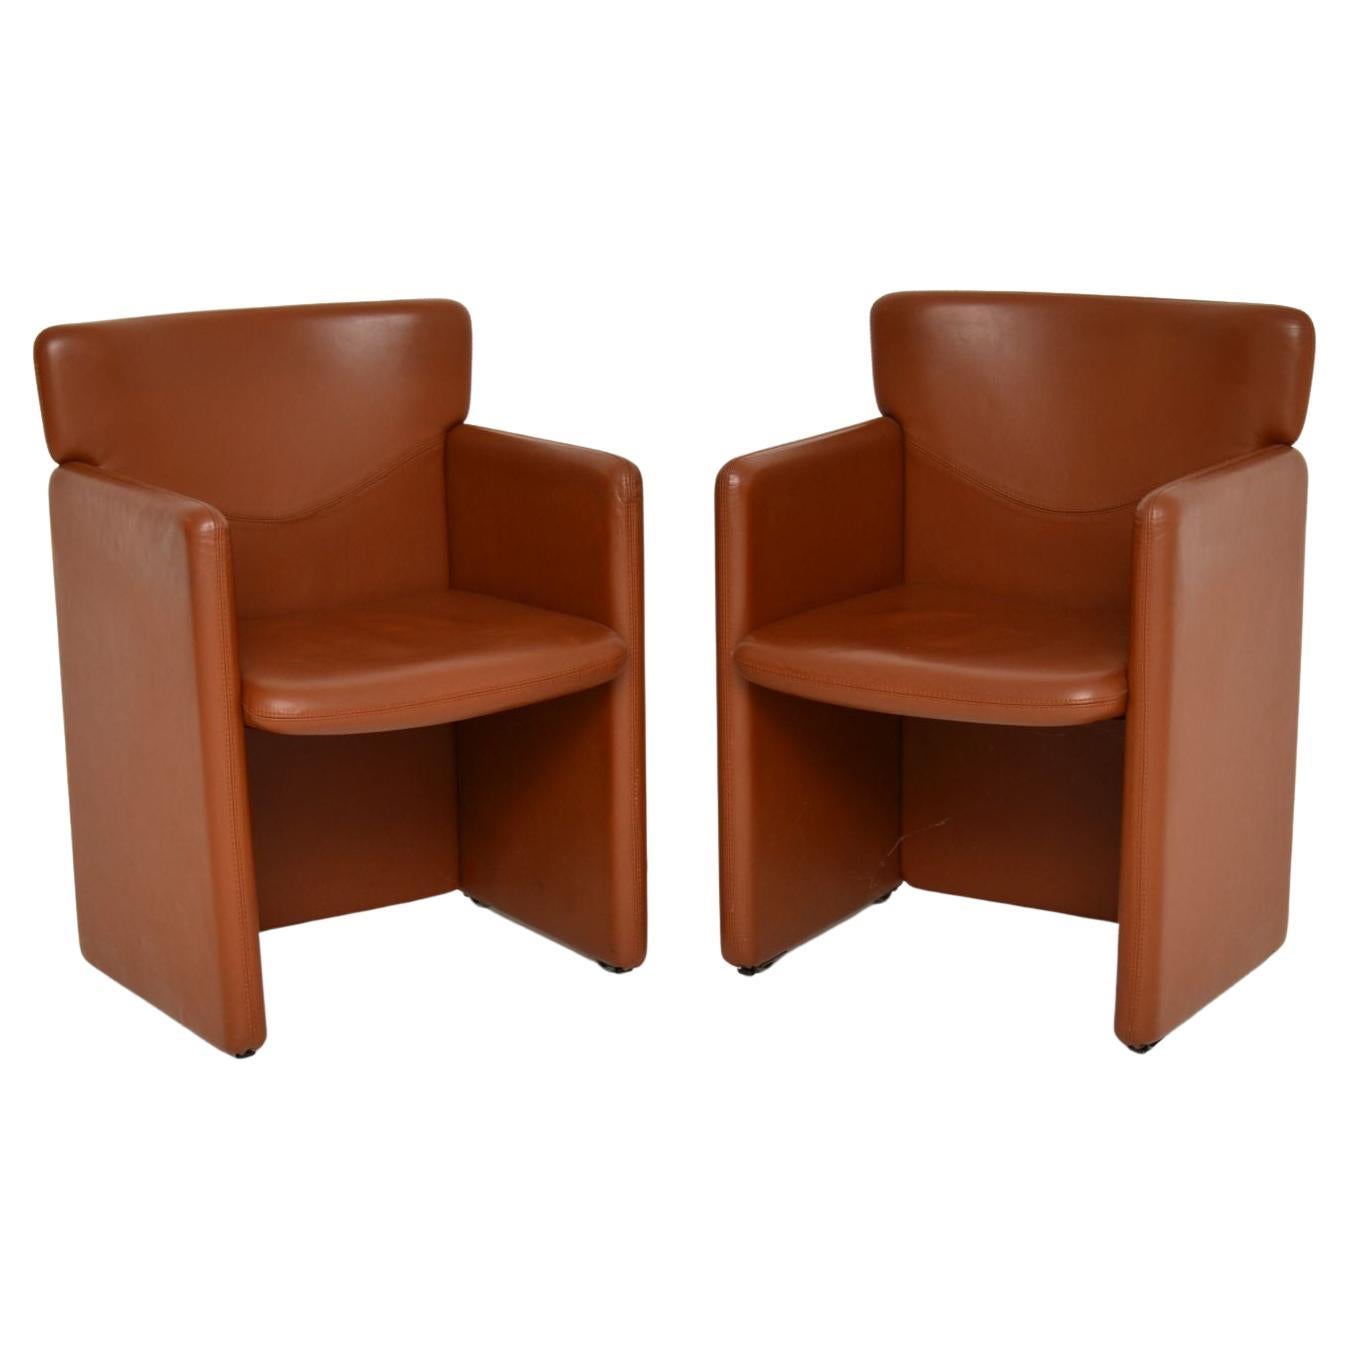 1970's Pair of Vintage Leather Armchairs